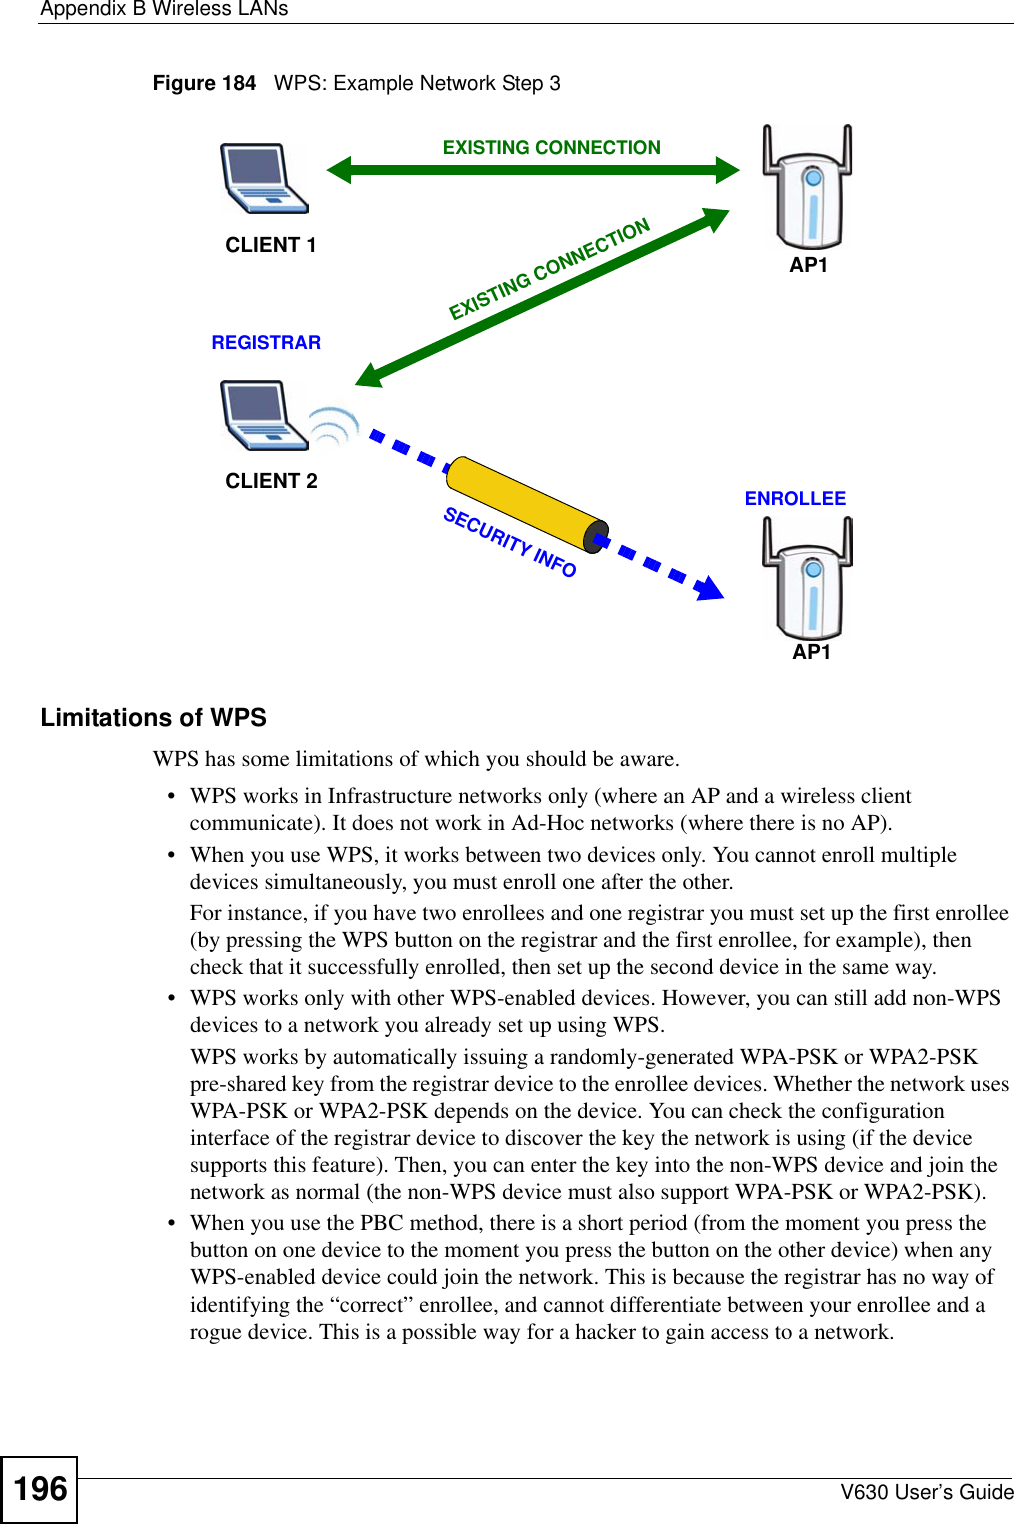 Appendix B Wireless LANsV630 User’s Guide196Figure 184   WPS: Example Network Step 3Limitations of WPSWPS has some limitations of which you should be aware. • WPS works in Infrastructure networks only (where an AP and a wireless client communicate). It does not work in Ad-Hoc networks (where there is no AP).• When you use WPS, it works between two devices only. You cannot enroll multiple devices simultaneously, you must enroll one after the other. For instance, if you have two enrollees and one registrar you must set up the first enrollee (by pressing the WPS button on the registrar and the first enrollee, for example), then check that it successfully enrolled, then set up the second device in the same way.• WPS works only with other WPS-enabled devices. However, you can still add non-WPS devices to a network you already set up using WPS. WPS works by automatically issuing a randomly-generated WPA-PSK or WPA2-PSK pre-shared key from the registrar device to the enrollee devices. Whether the network uses WPA-PSK or WPA2-PSK depends on the device. You can check the configuration interface of the registrar device to discover the key the network is using (if the device supports this feature). Then, you can enter the key into the non-WPS device and join the network as normal (the non-WPS device must also support WPA-PSK or WPA2-PSK).• When you use the PBC method, there is a short period (from the moment you press the button on one device to the moment you press the button on the other device) when any WPS-enabled device could join the network. This is because the registrar has no way of identifying the “correct” enrollee, and cannot differentiate between your enrollee and a rogue device. This is a possible way for a hacker to gain access to a network.CLIENT 1 AP1REGISTRARCLIENT 2EXISTING CONNECTIONSECURITY INFOENROLLEEAP1EXISTING CONNECTION